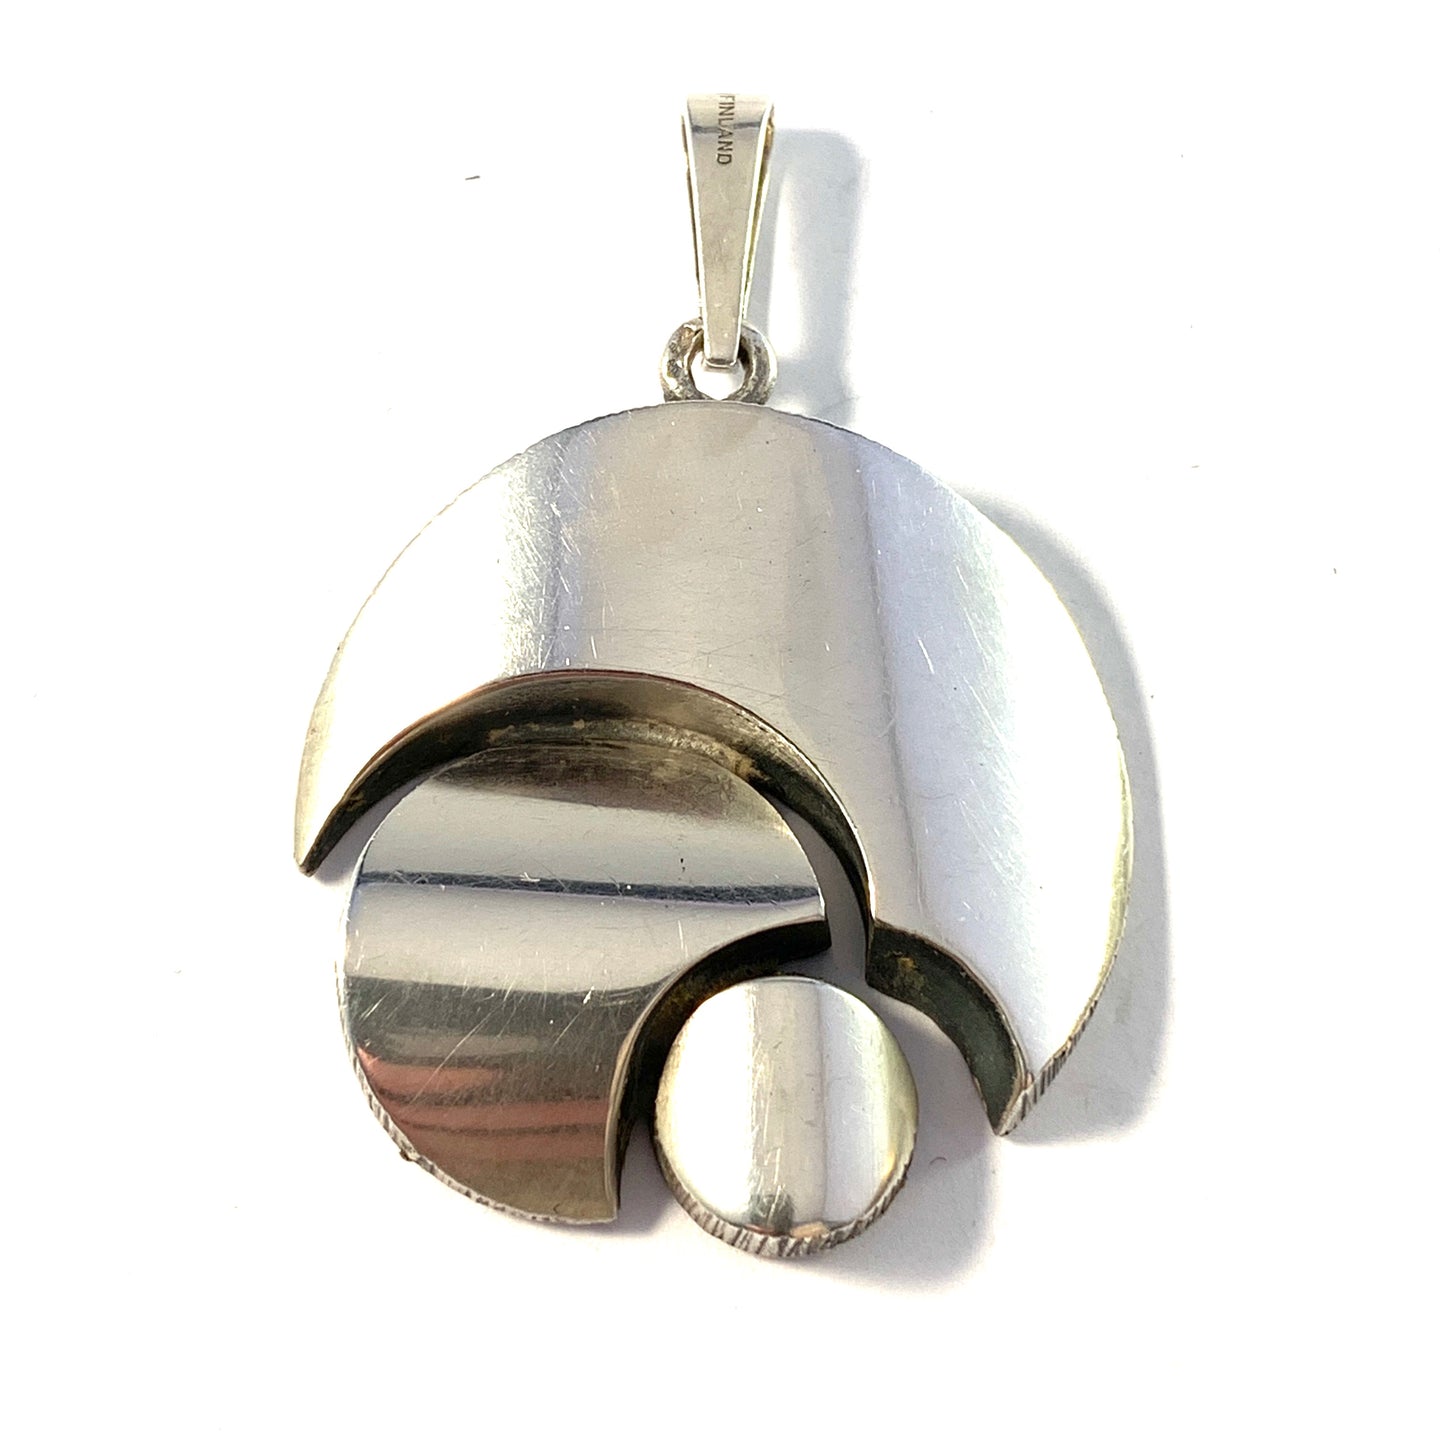 Karl Laine for Sten & Laine Finland 1977. Sterling Silver Pendant. Boxed.